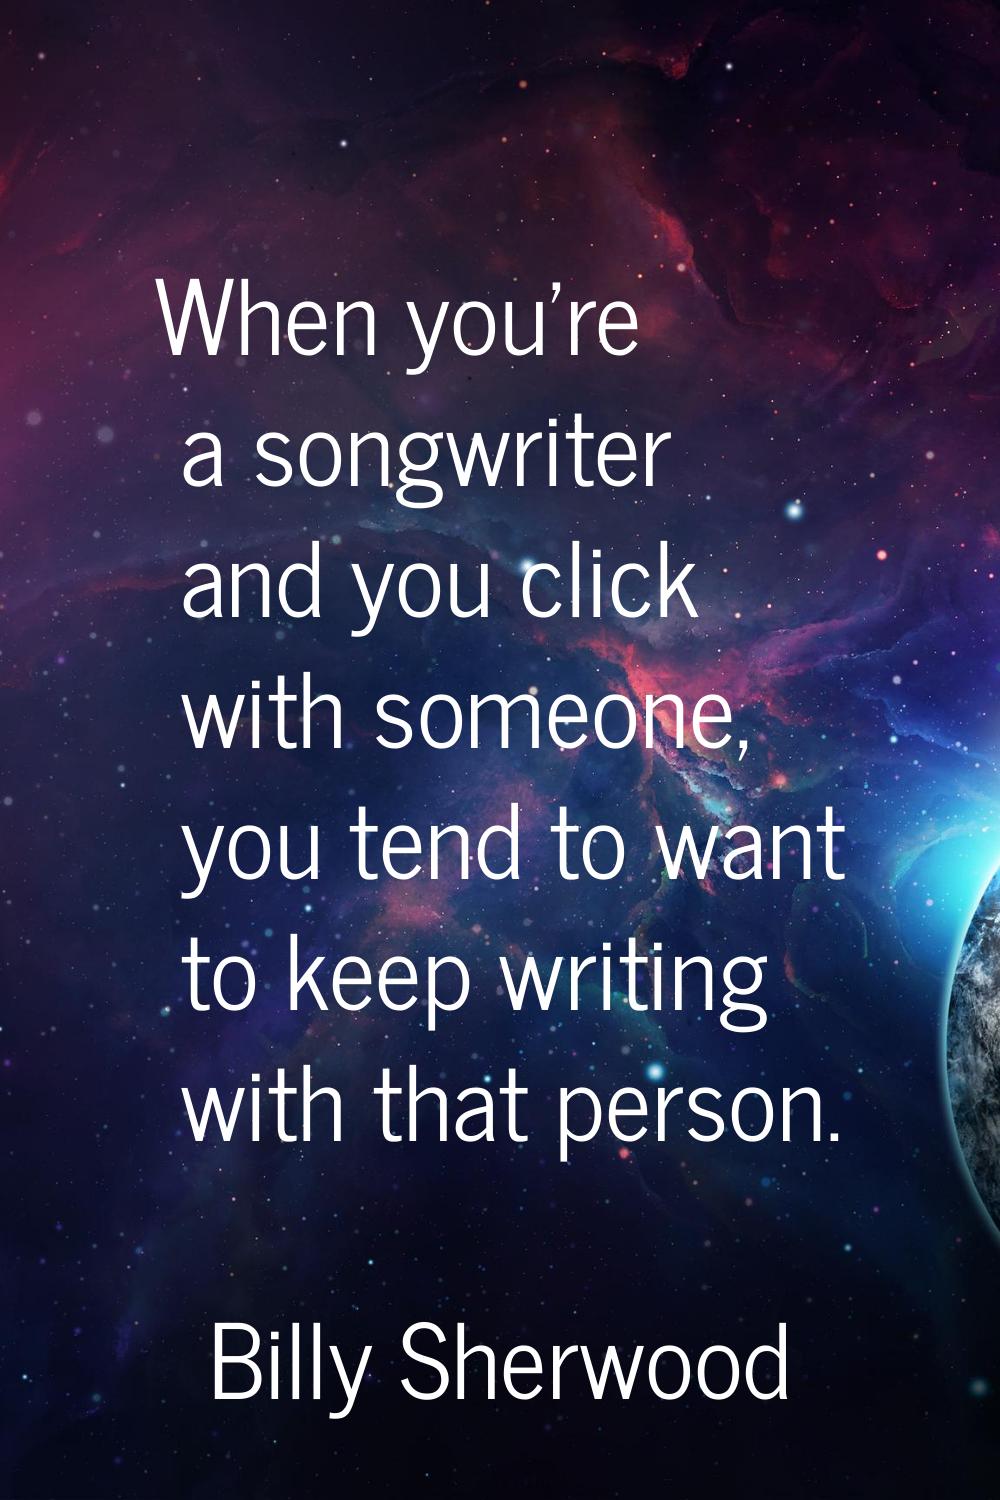 When you're a songwriter and you click with someone, you tend to want to keep writing with that per